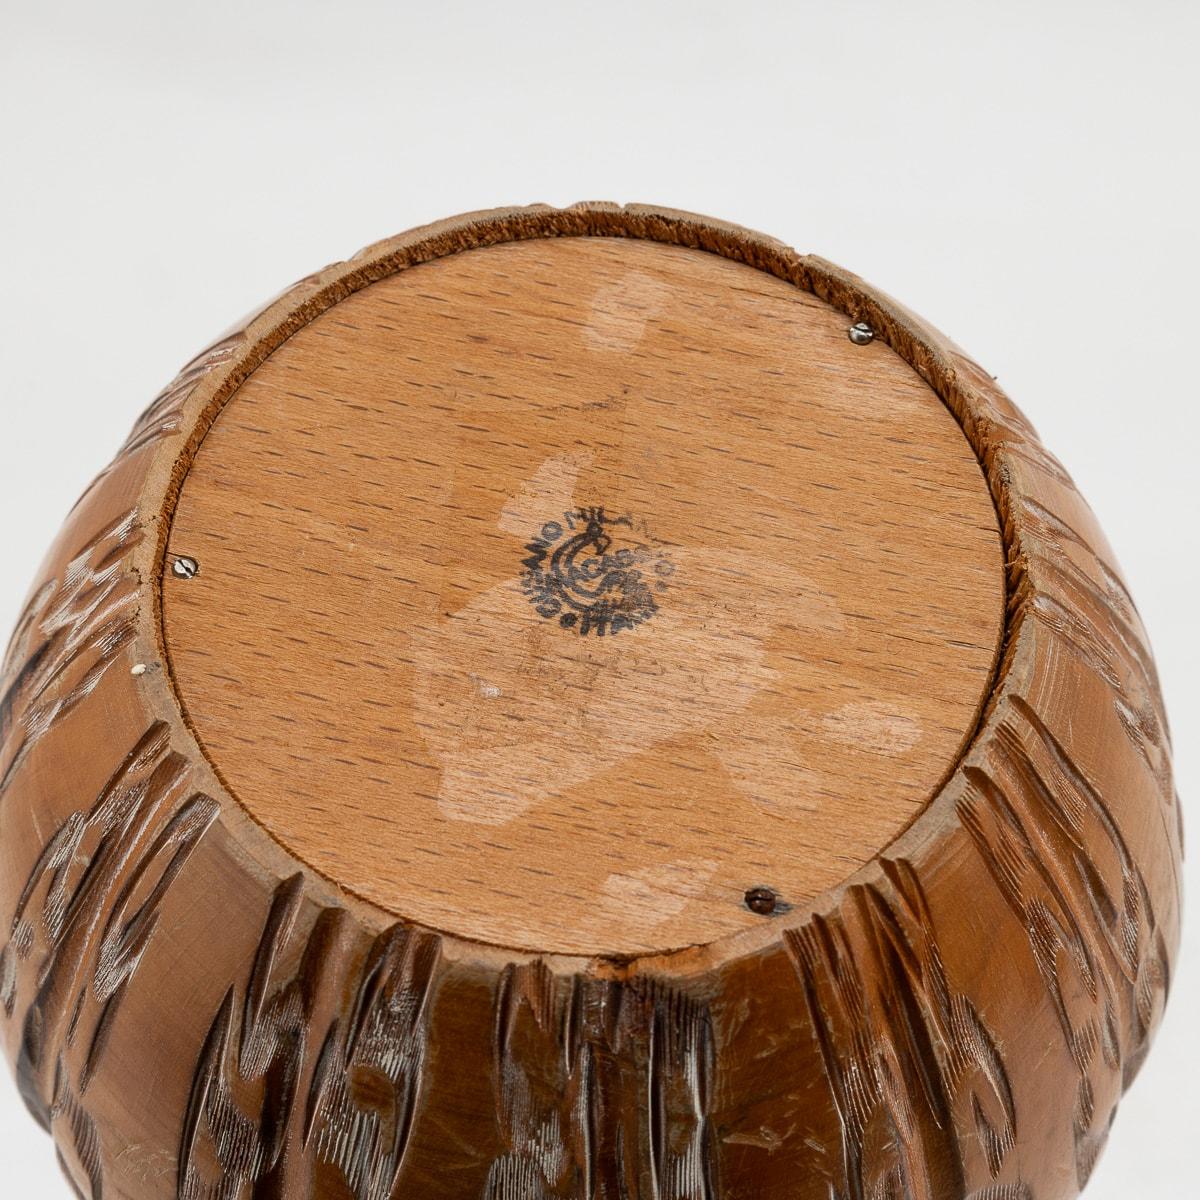 20th Century Italian Carved Wood Flask By Aldo Tura For Macabo c.1960 For Sale 6